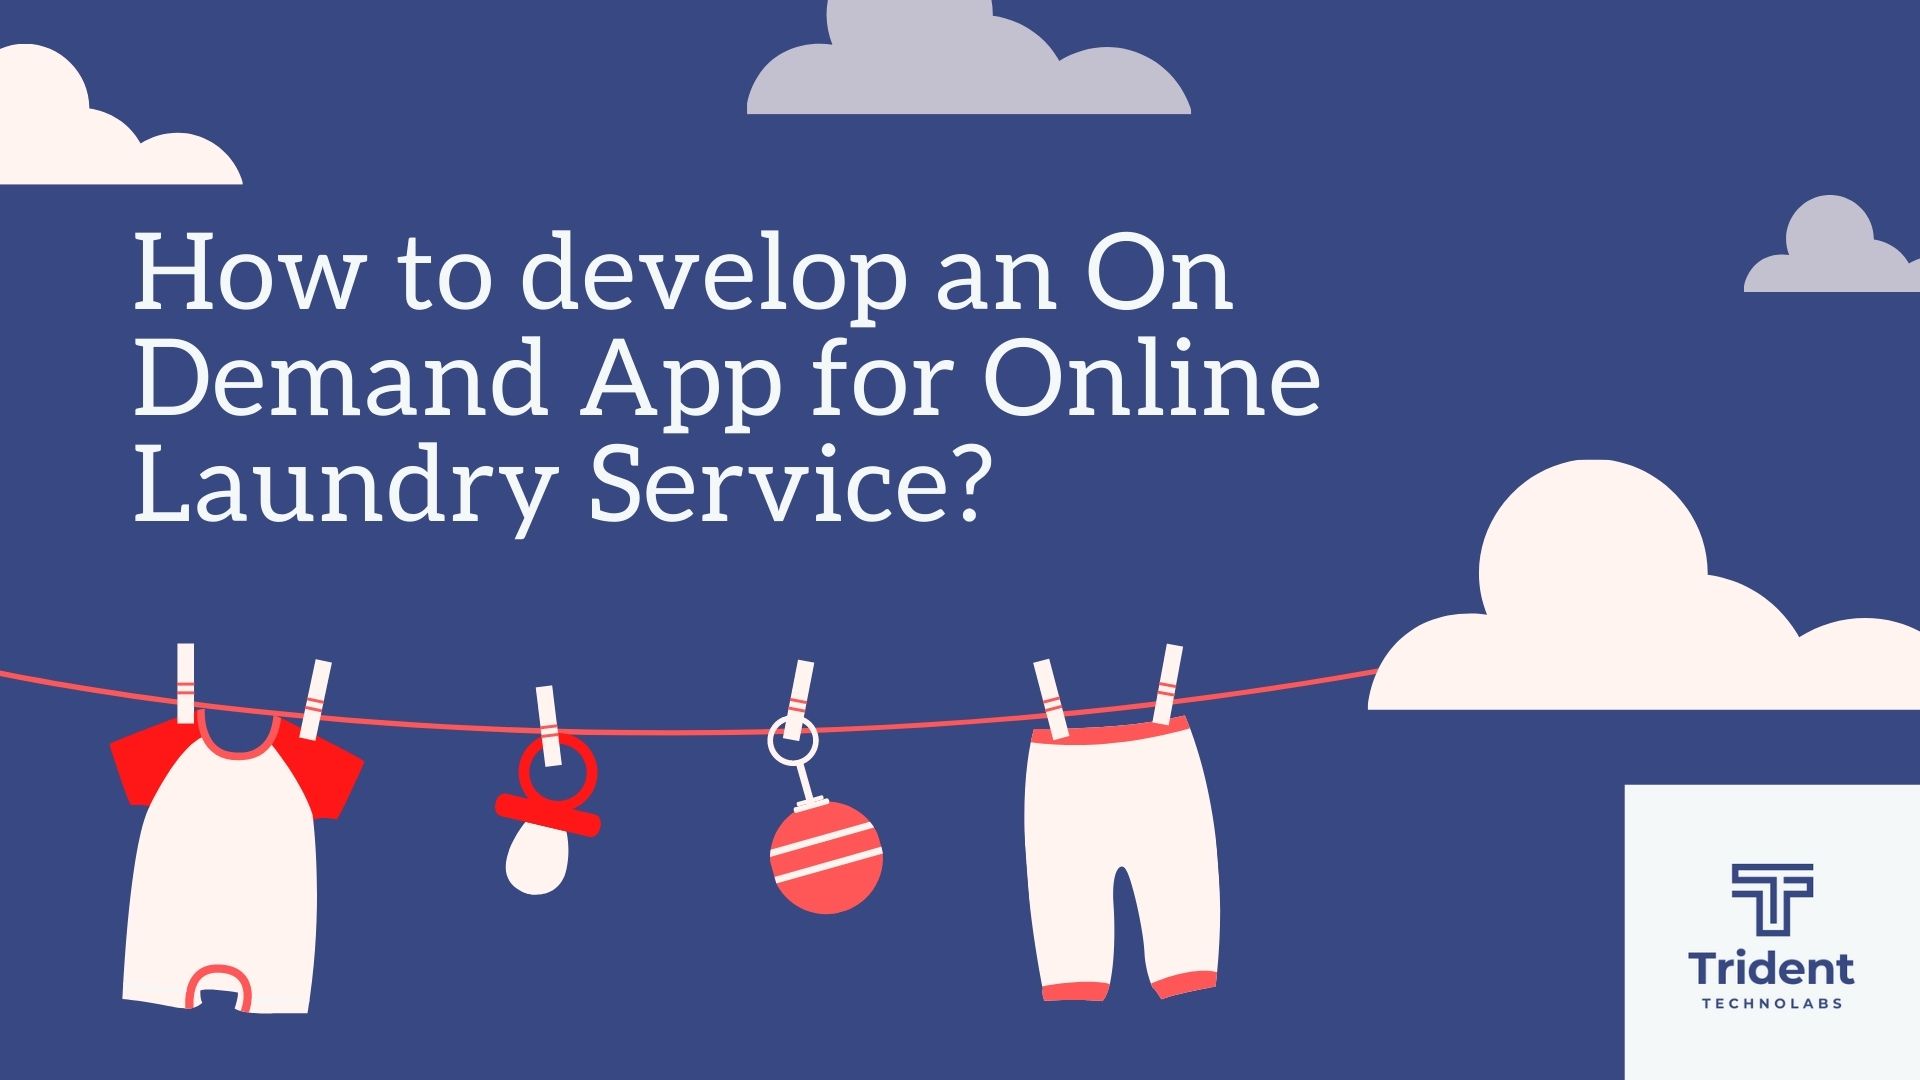 On demand app for laundry